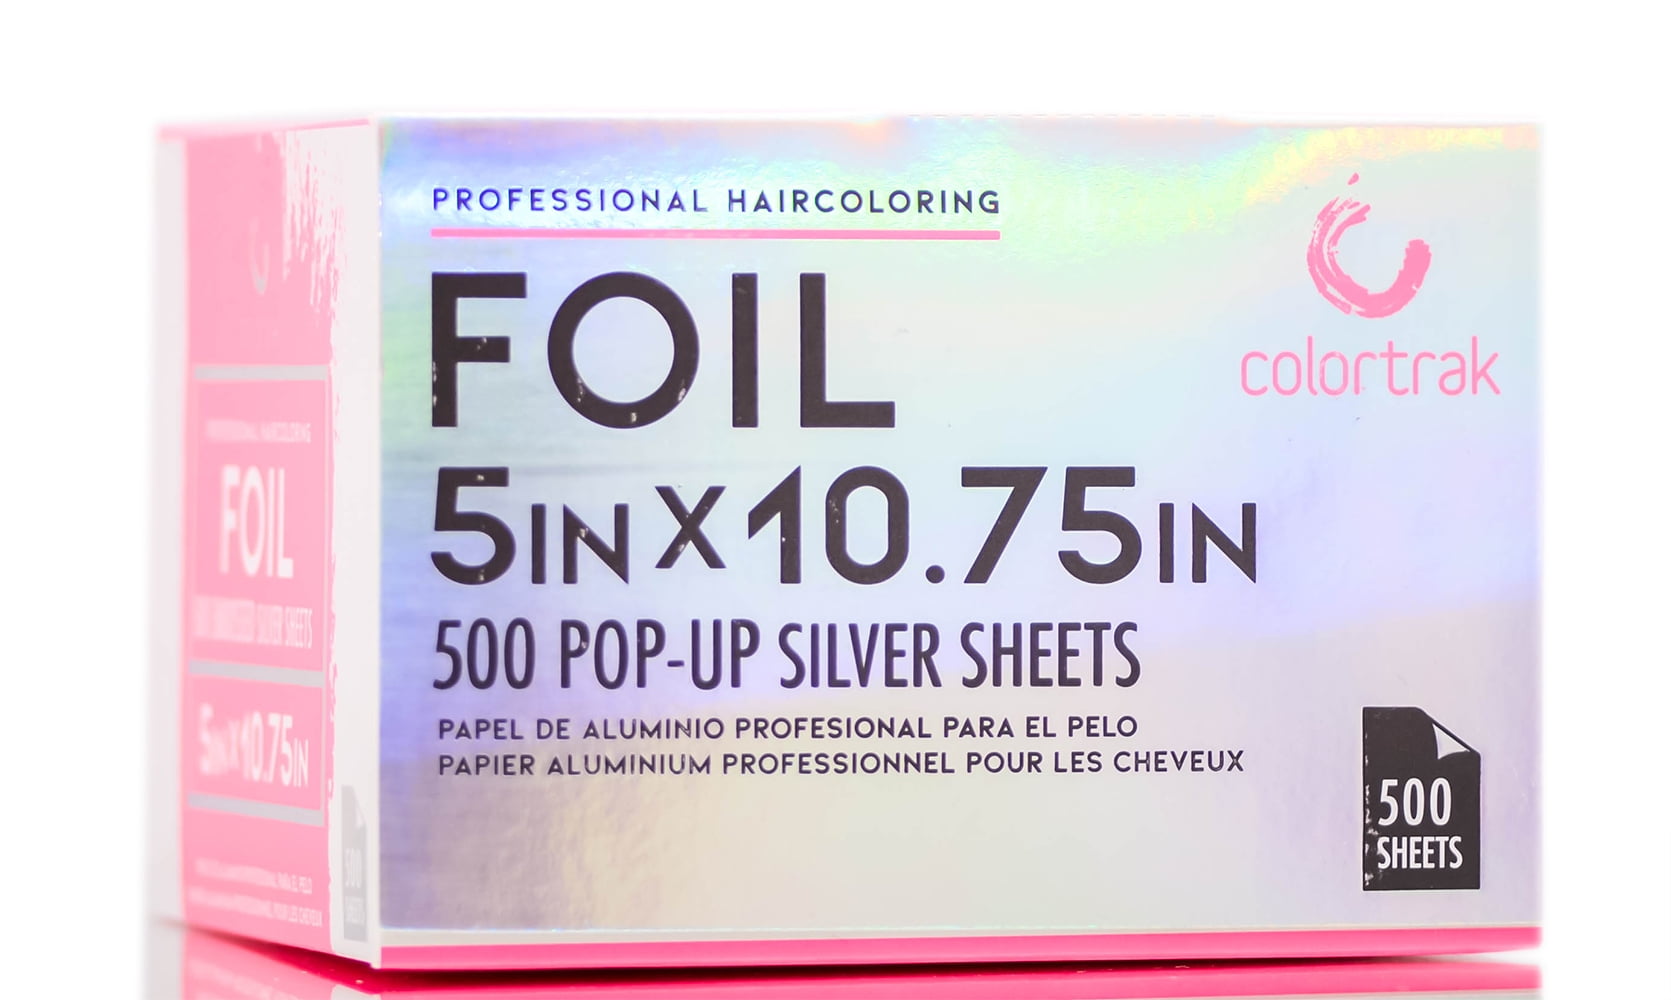 Colortrak Embossed Sheets Silver Aluminum Foil Pop-up Dispenser, 500  Pre-cut Sheets Non-slip Textured Silver 5 x 11 Sheets for Hair Foil  Coloring and